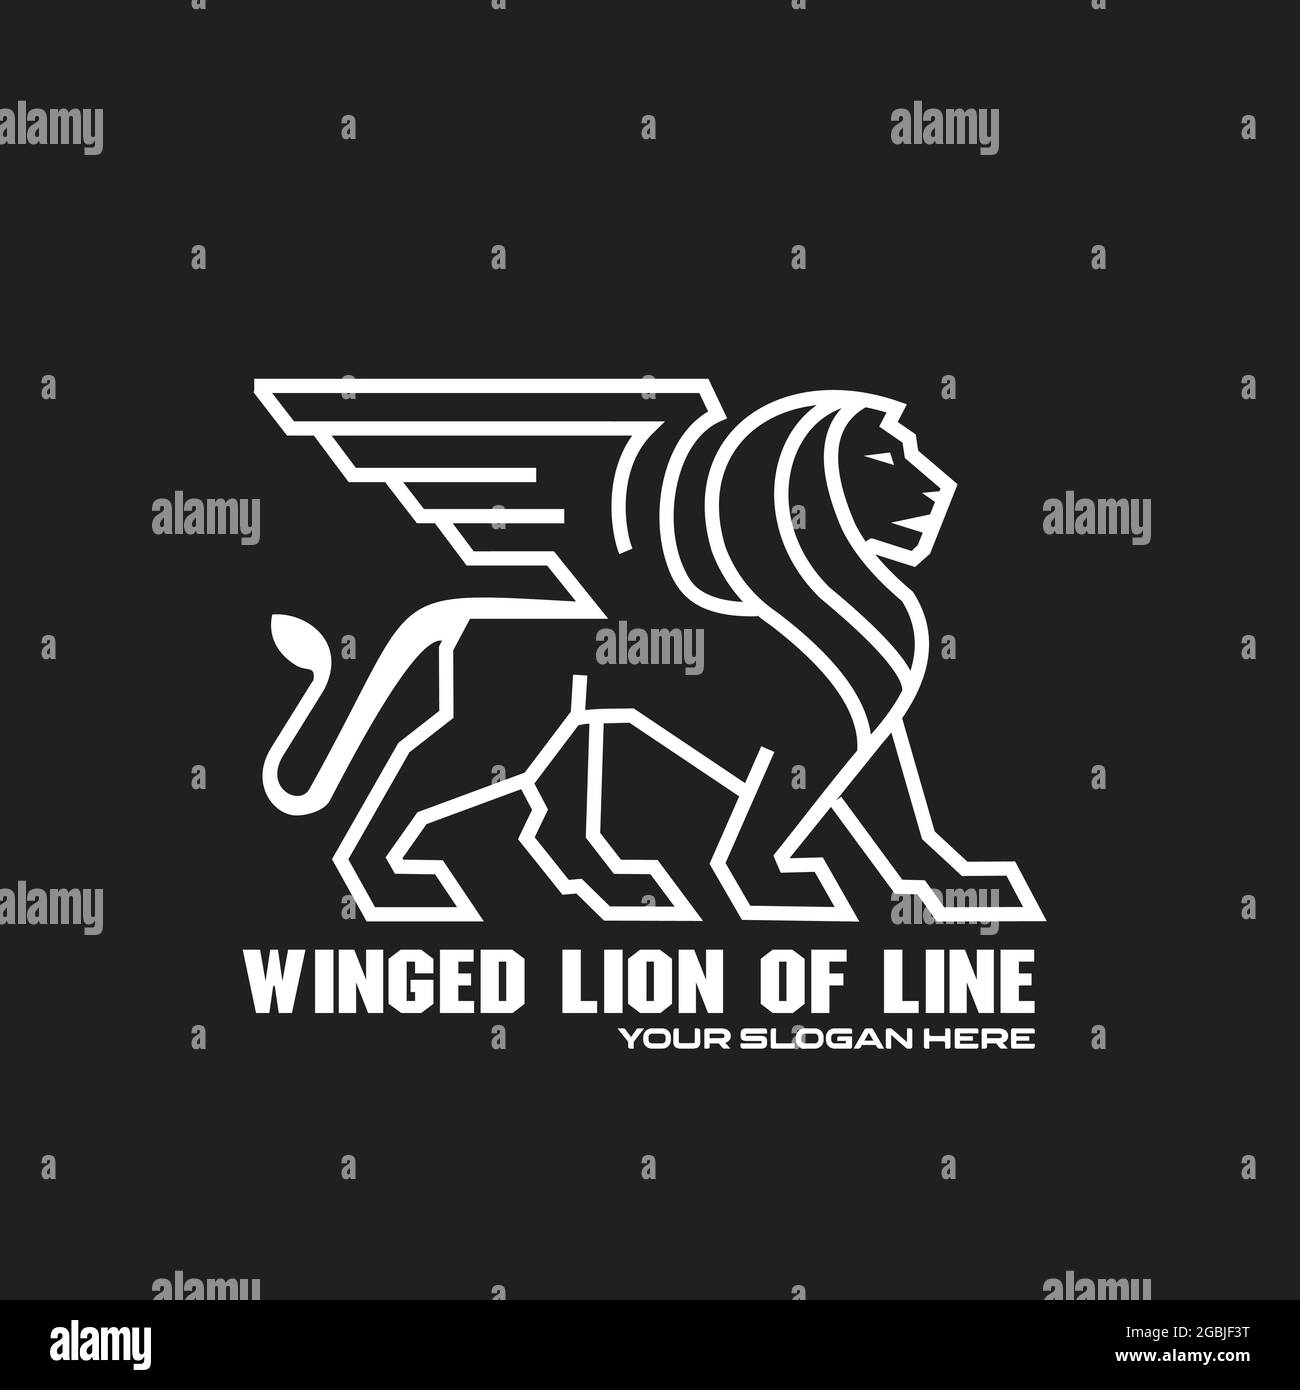 winged lion flat black with black background logo exclusive design inspiration Stock Vector